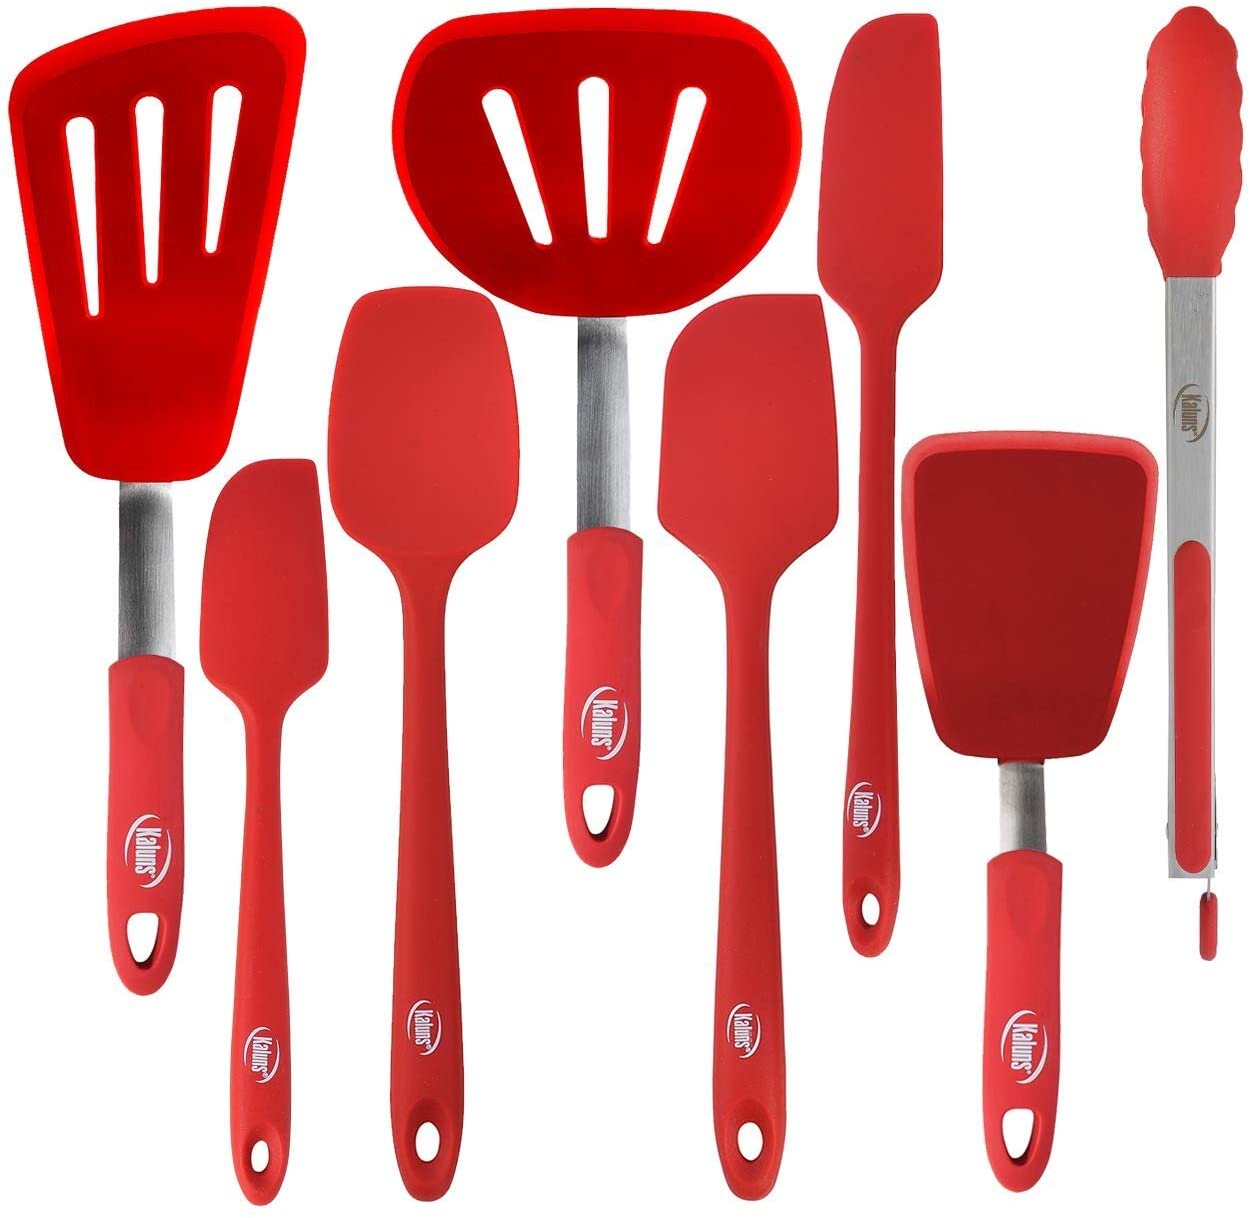 Baking Utensils - 17 Nylon Stainless Steel Baking Supplies - Non-Stick and  Heat Resistant Bakeware set - New Baker's Gadget Tools Collection - Great